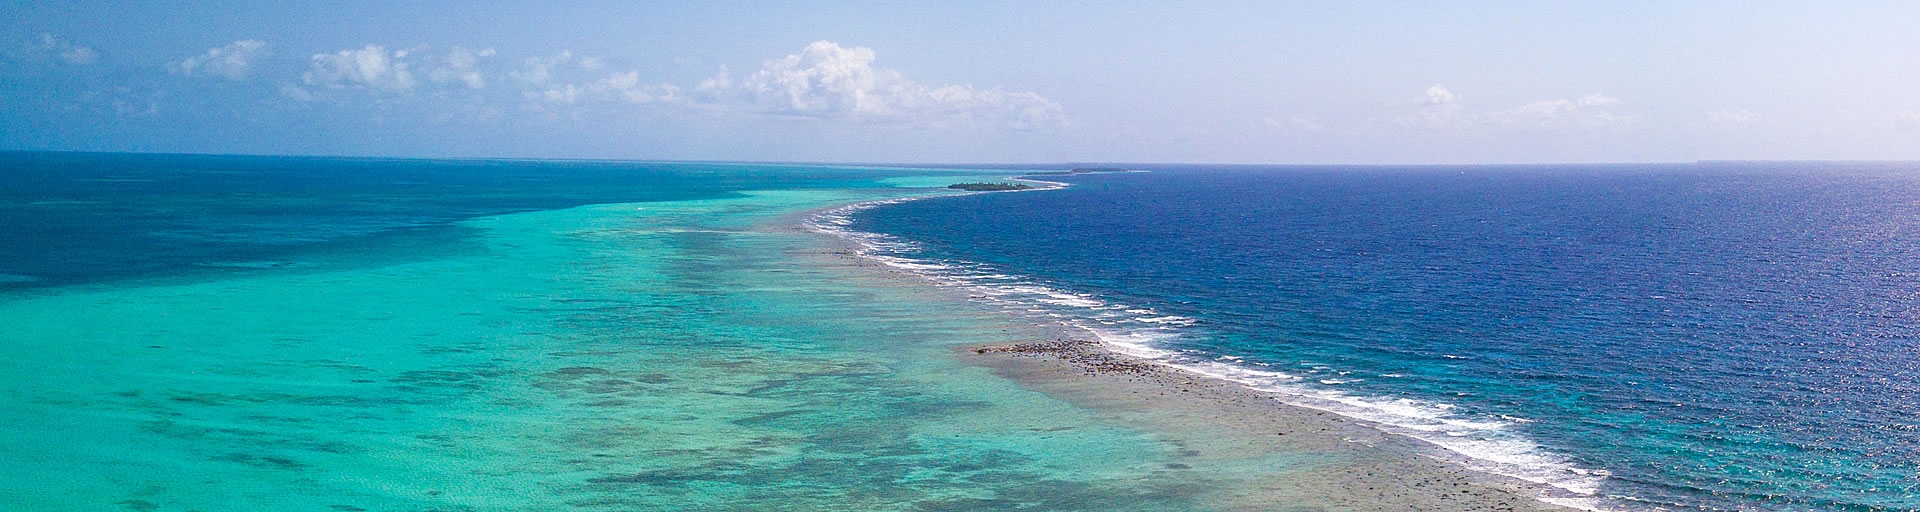 Belize Coral Atolls and Barrier Reef